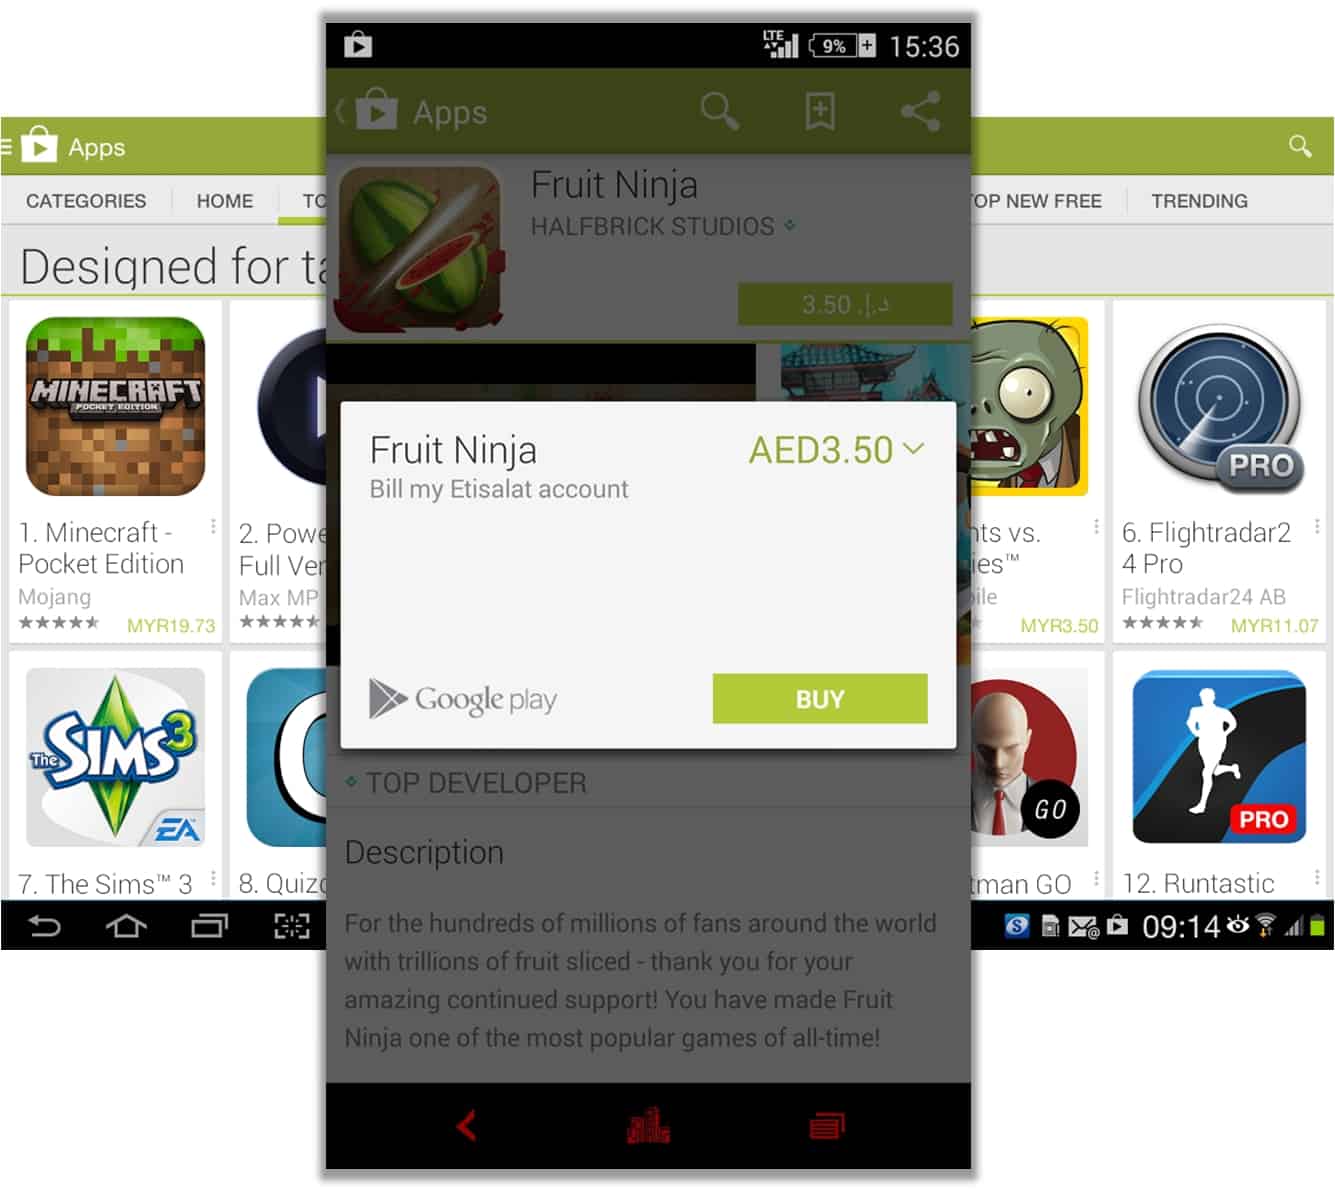 Etisalat Subscribers Can Now Purchase on Google Play Via Their Mobile Account